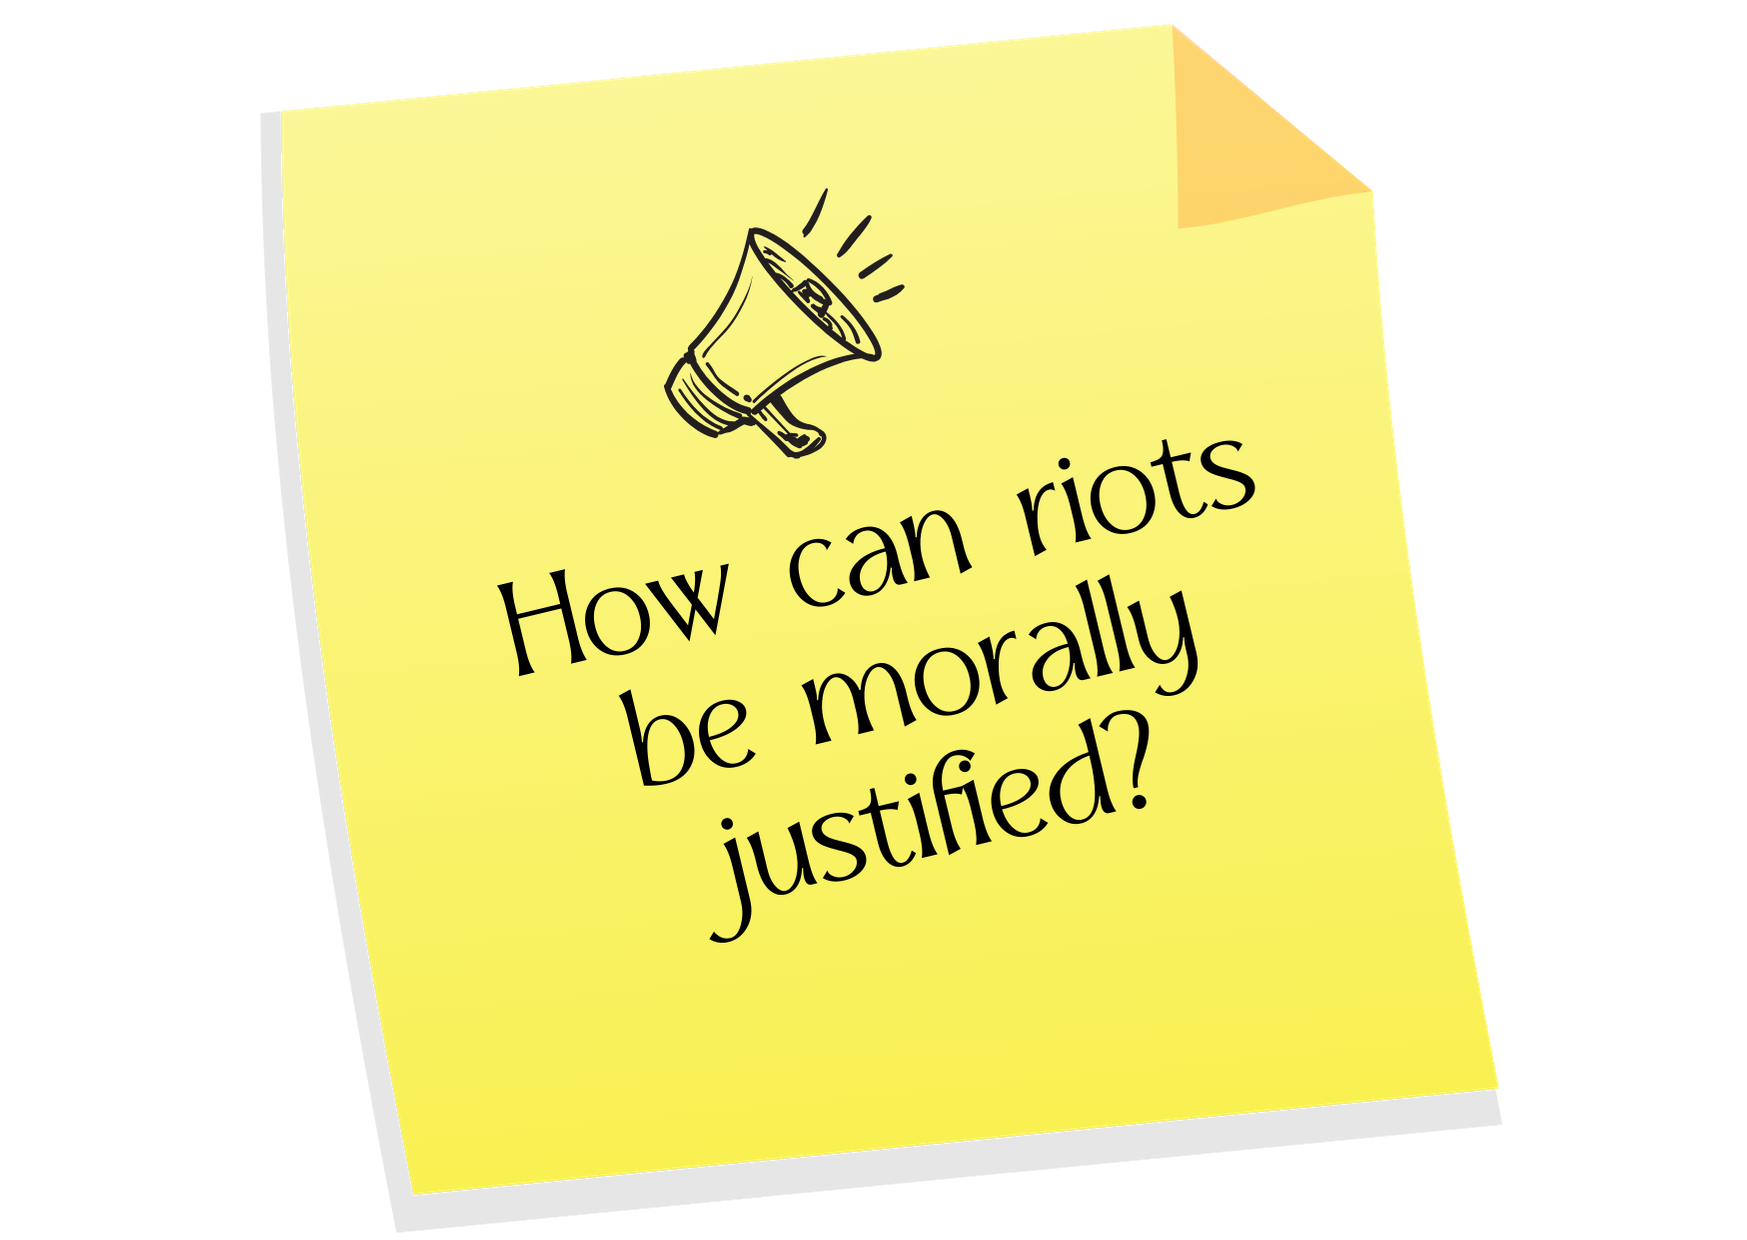 sketch of question mark? Words: How can riots be morally justified?